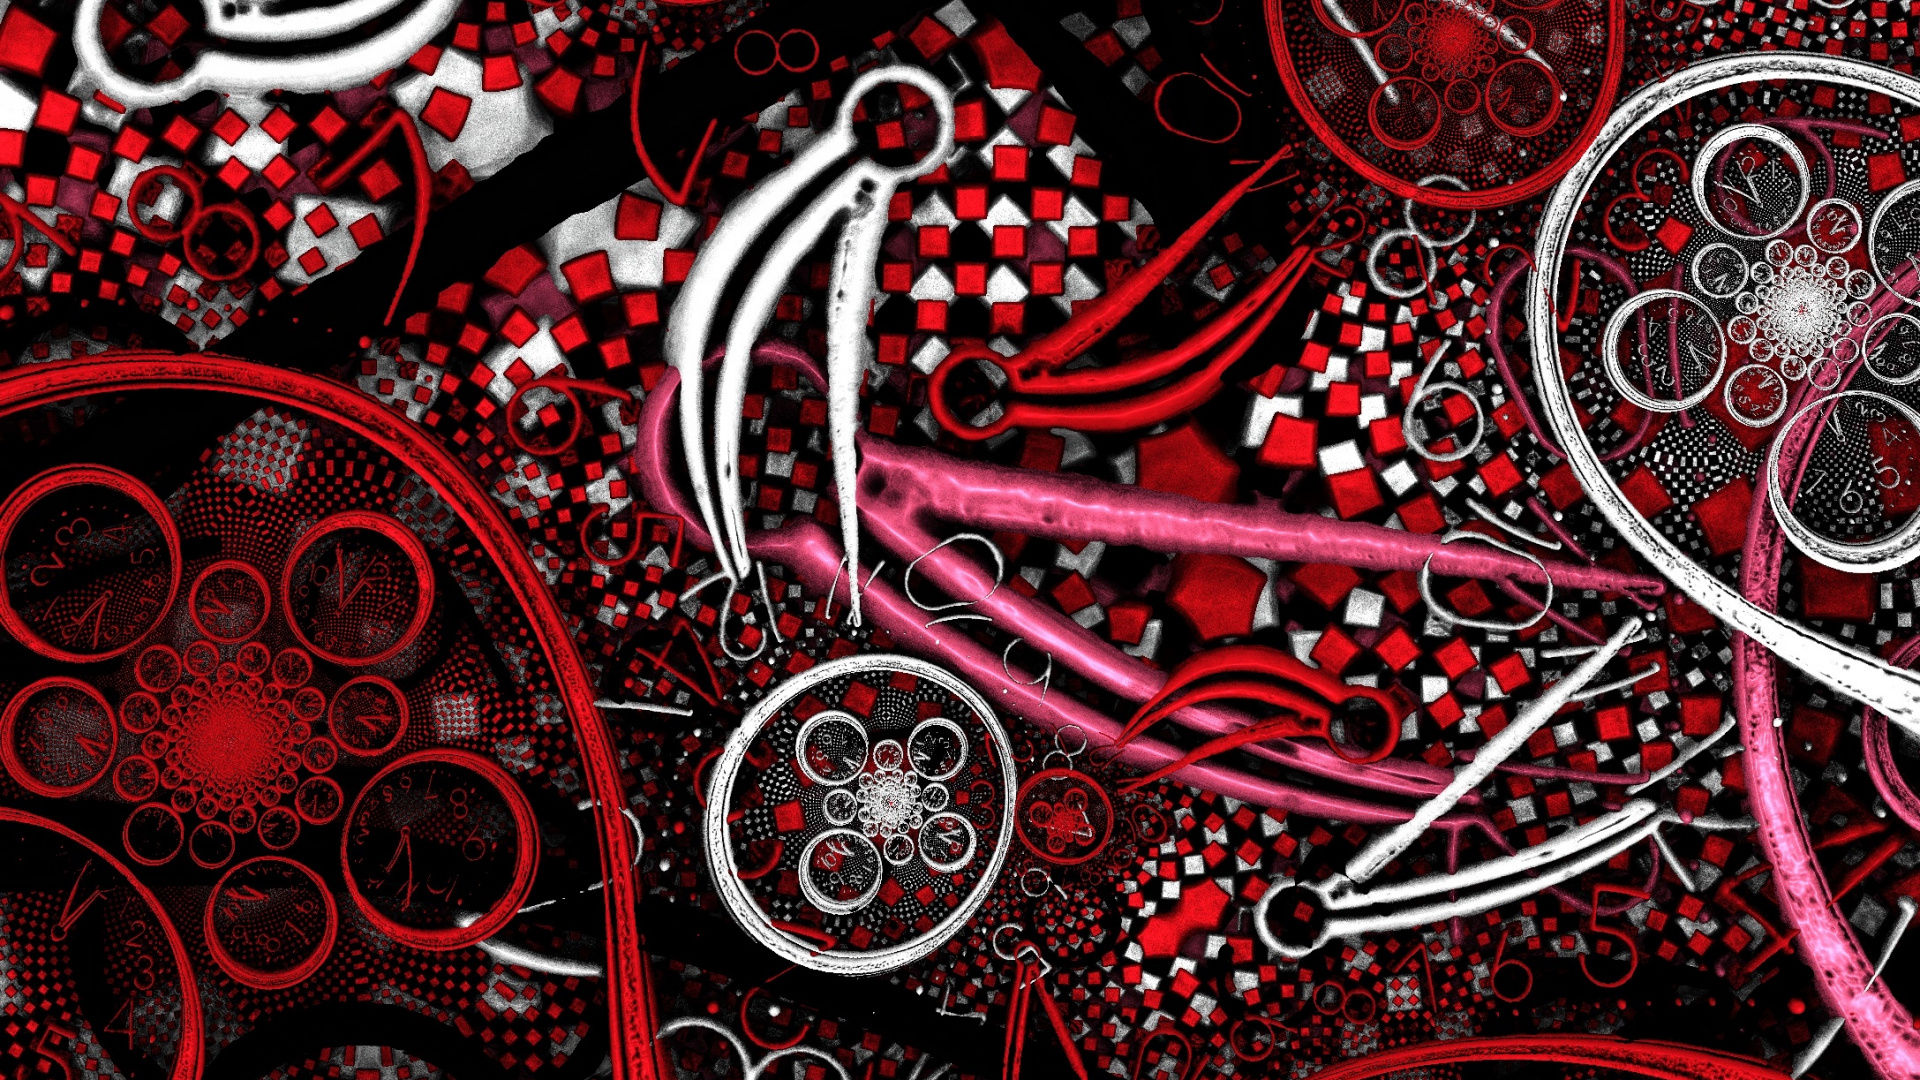 Red and White Abstract Painting. Wallpaper in 1920x1080 Resolution